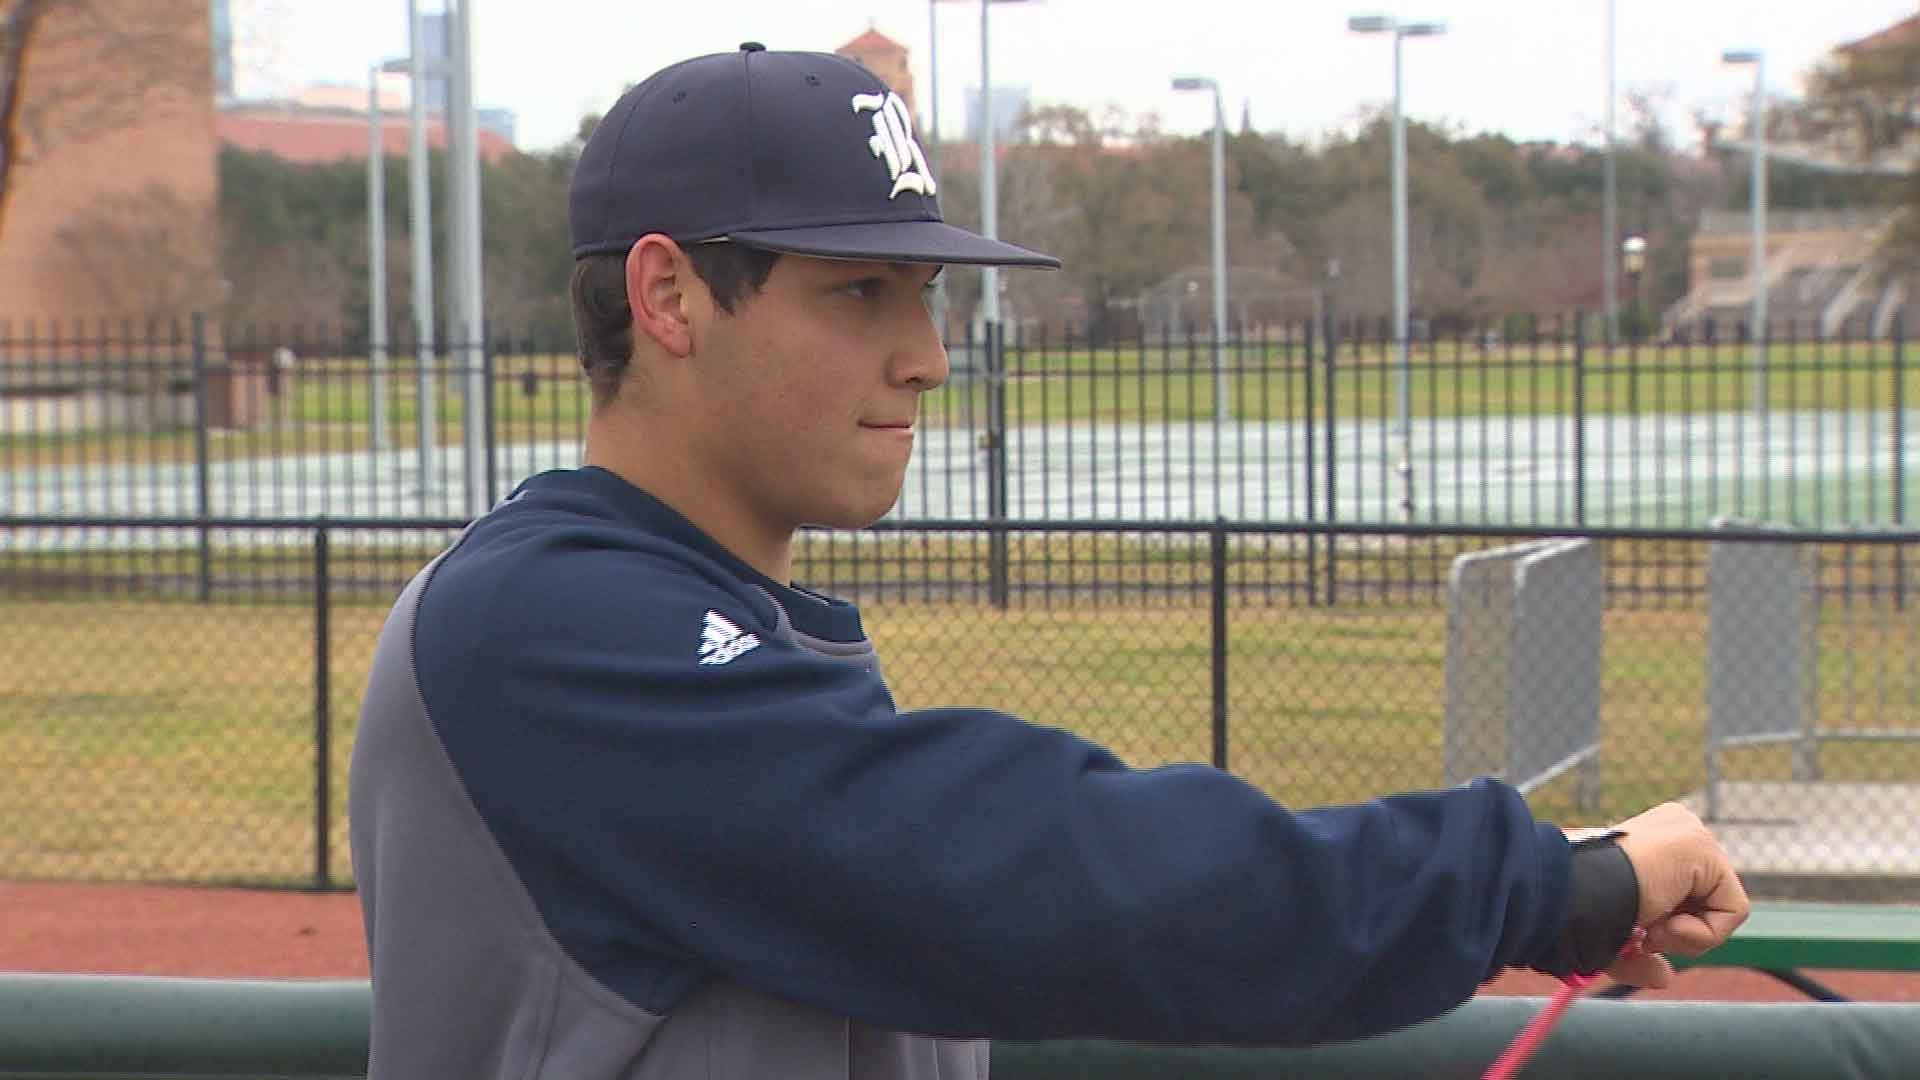 Andy Pettitte excited to see son play at Rice